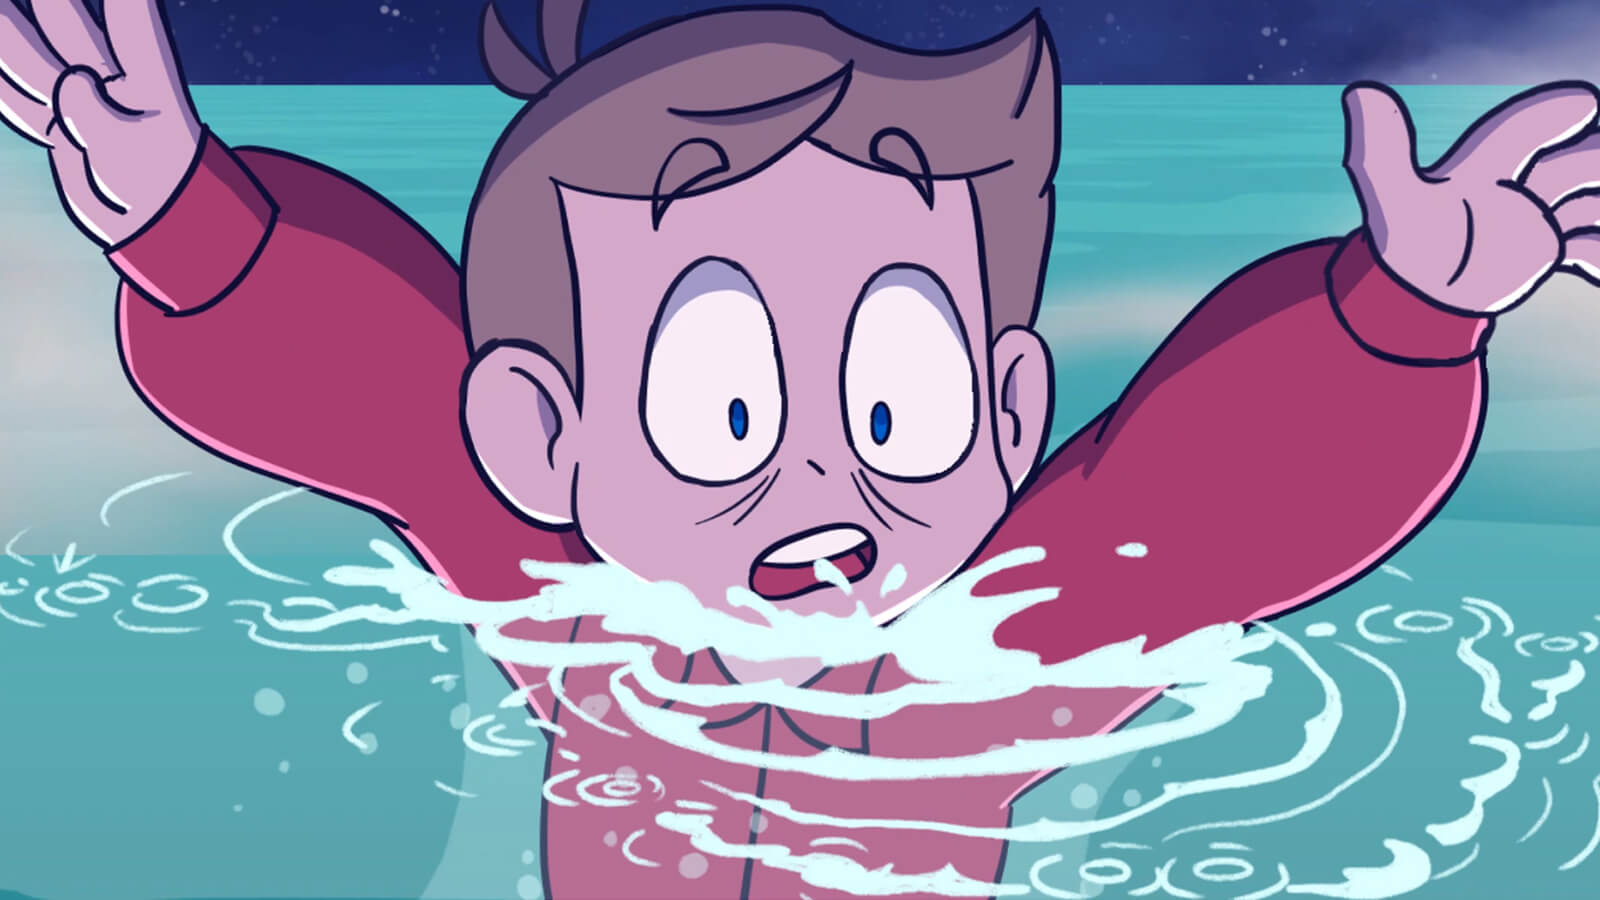 A startled boy sinks beneath the surface of the ocean.